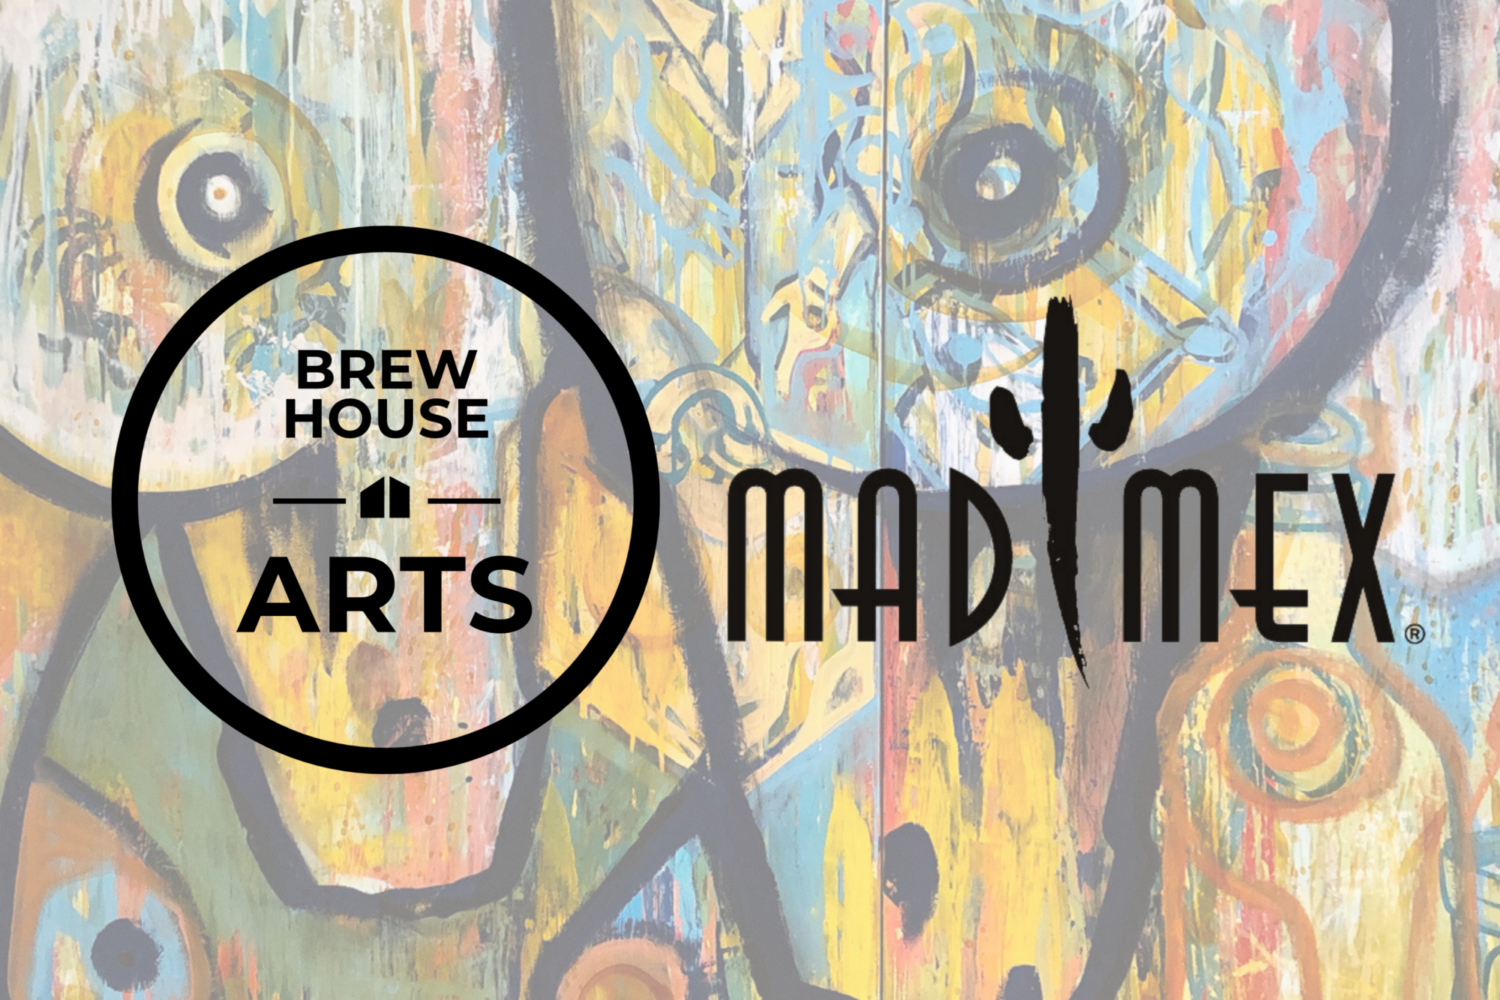 logo of Brew House Arts and Mad Mex with painting in the background of 2 horse faces touching in the center.